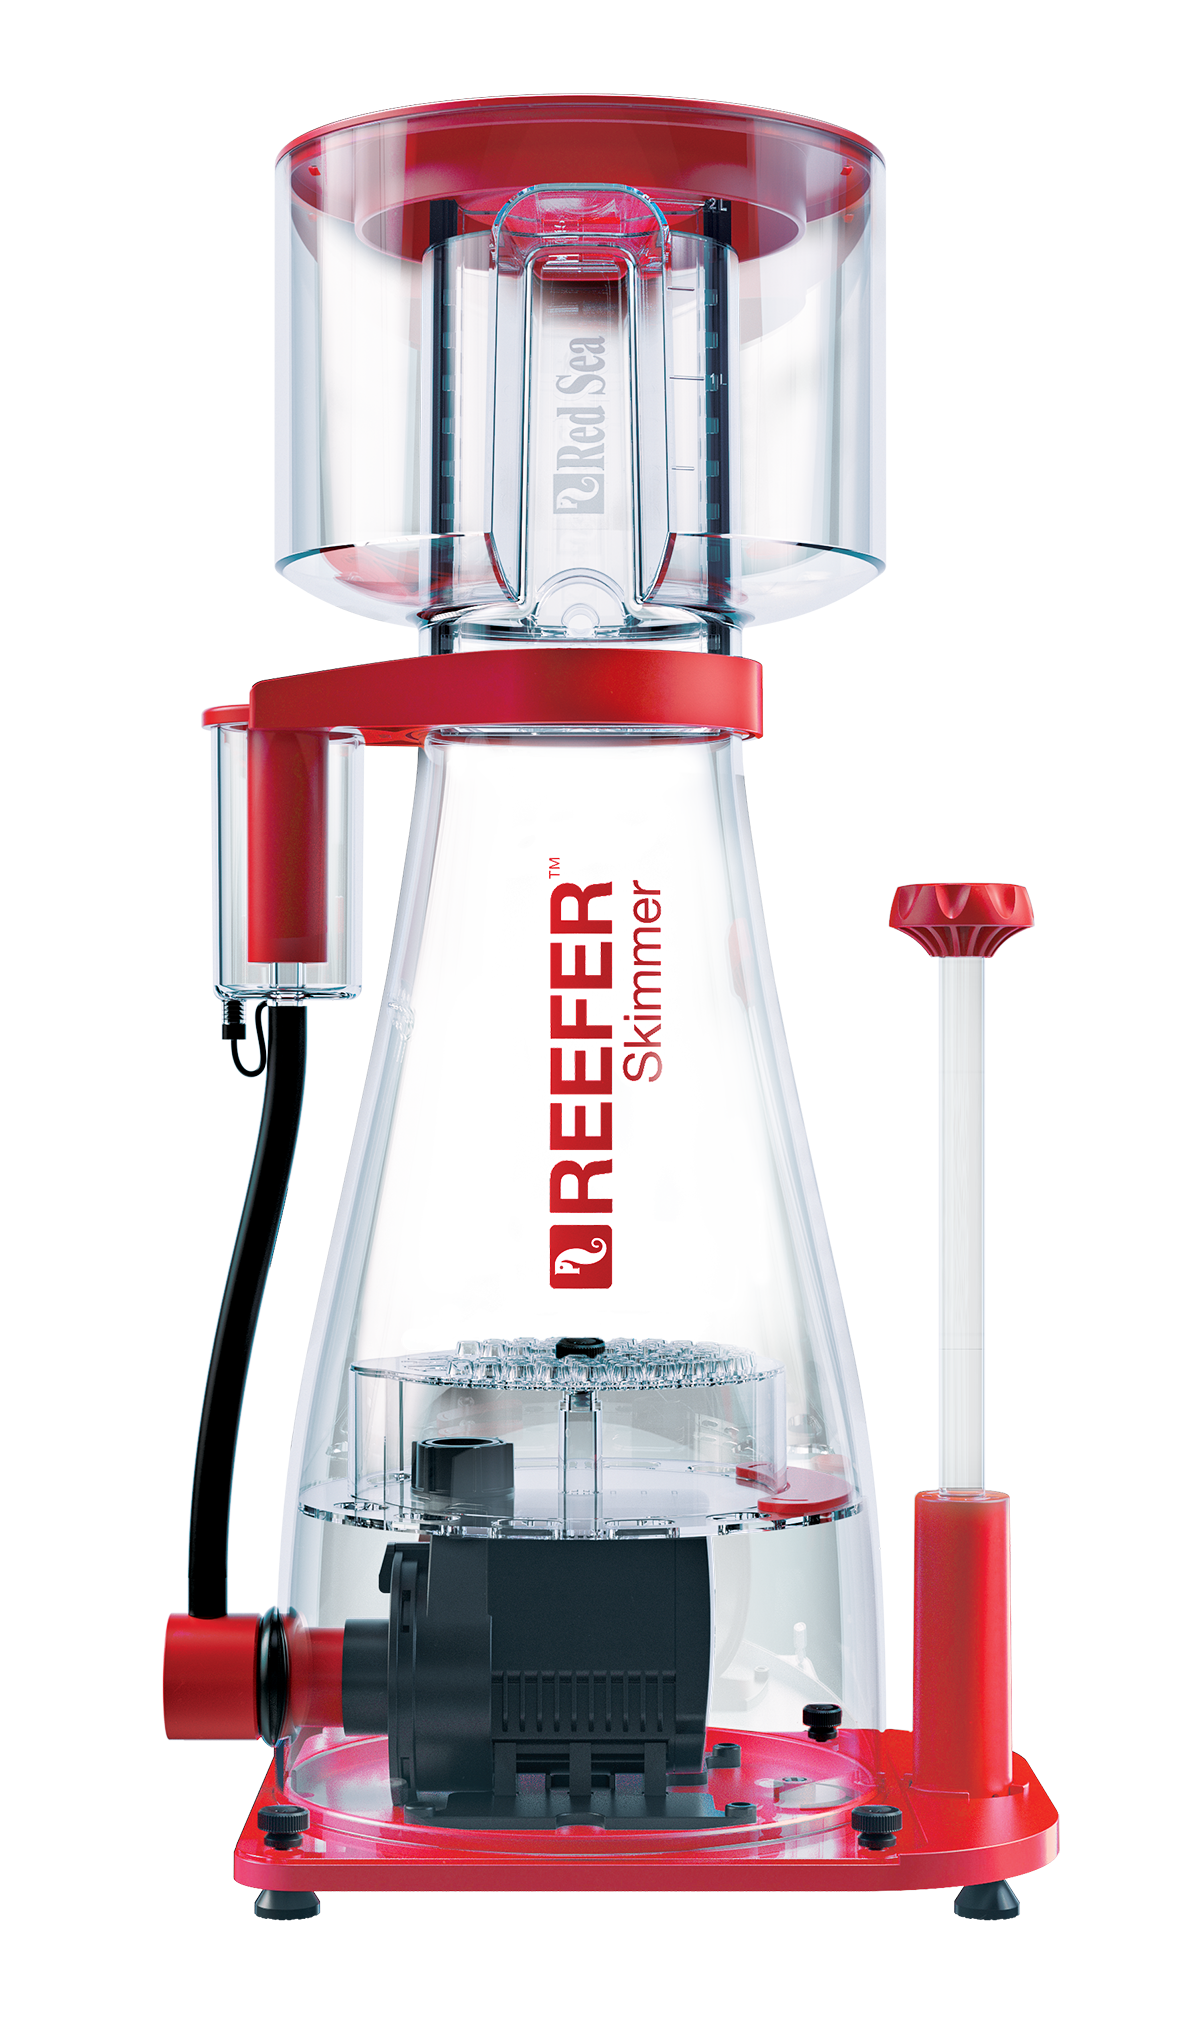 Red Sea Reefer 900 Internal Protein Skimmer for tanks up to 740 gallons. Features manual neck cleaner, FoamView window, and high flow air silencer.